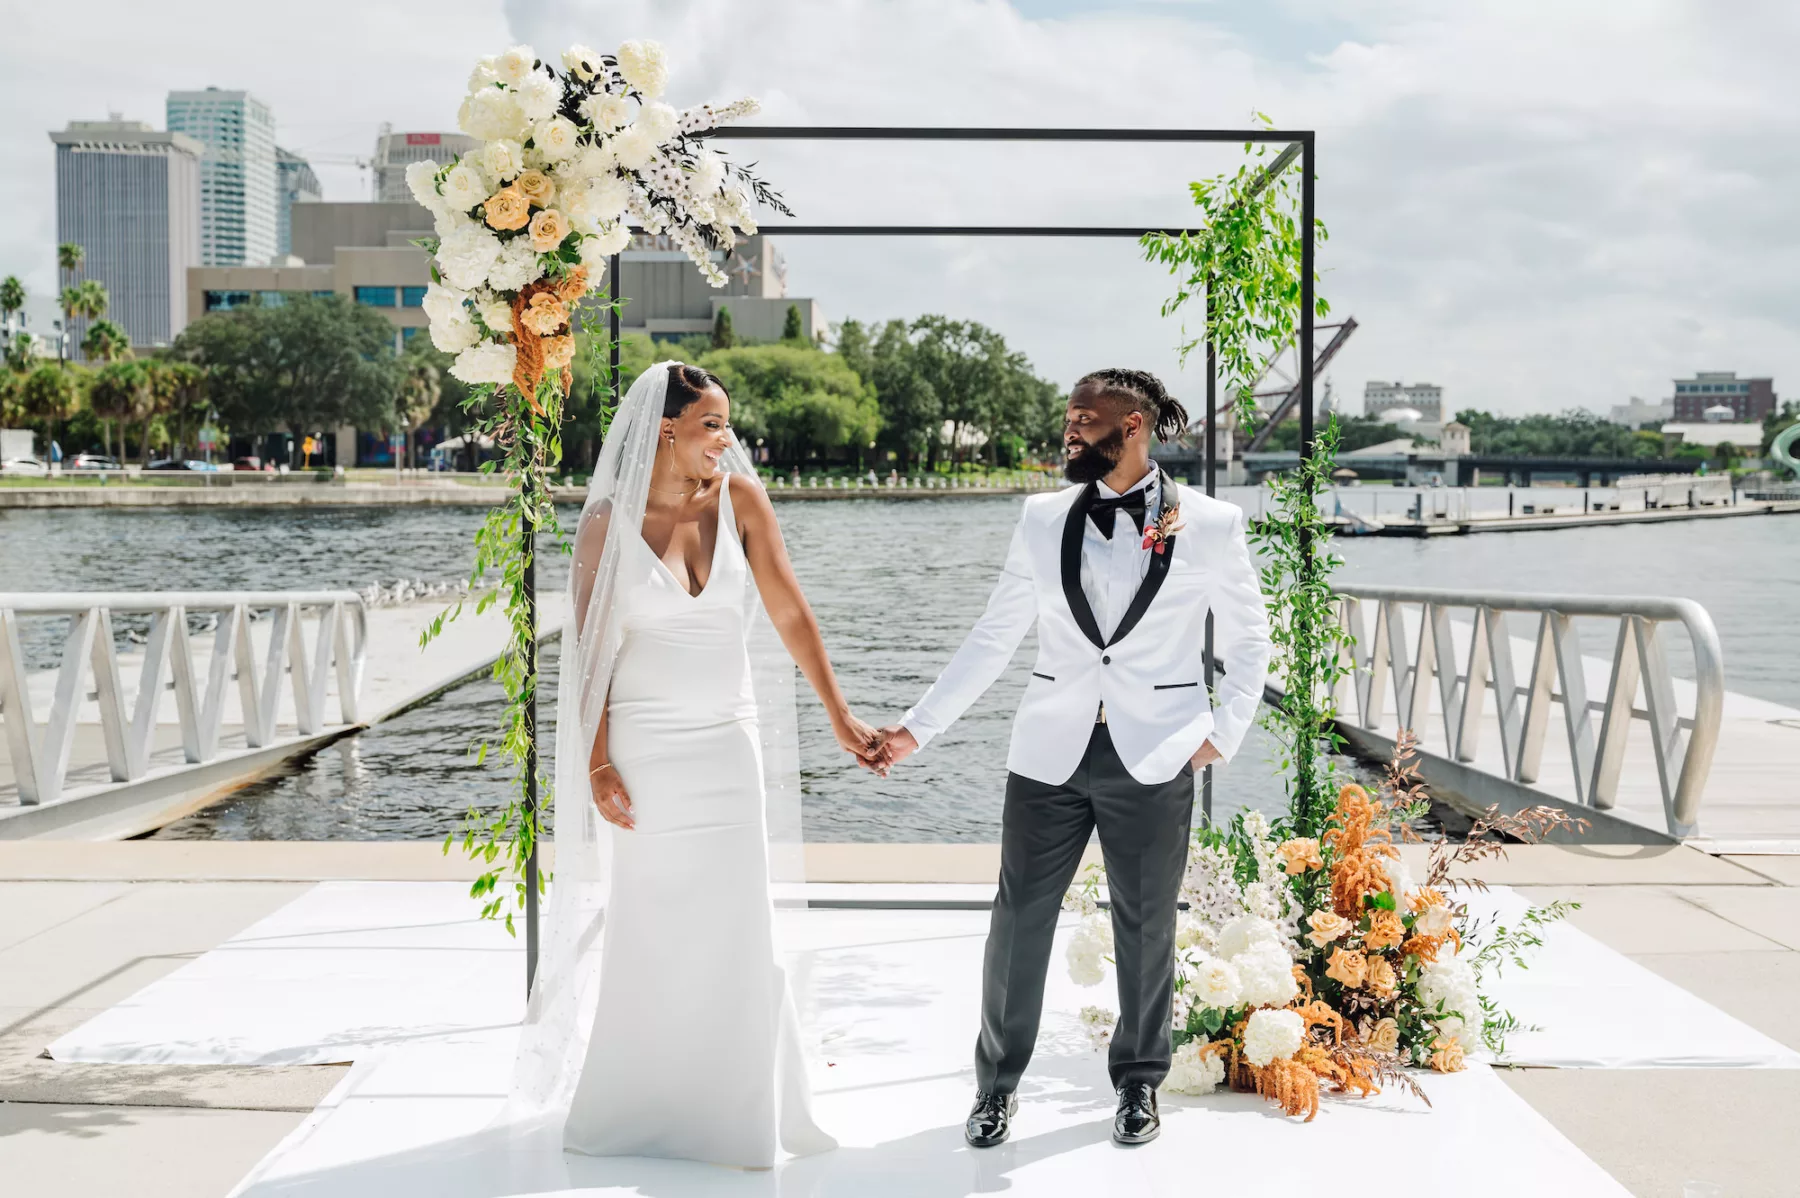 Bride and Groom Just Married Waterfront Wedding Portrait | Venue Tampa River Center